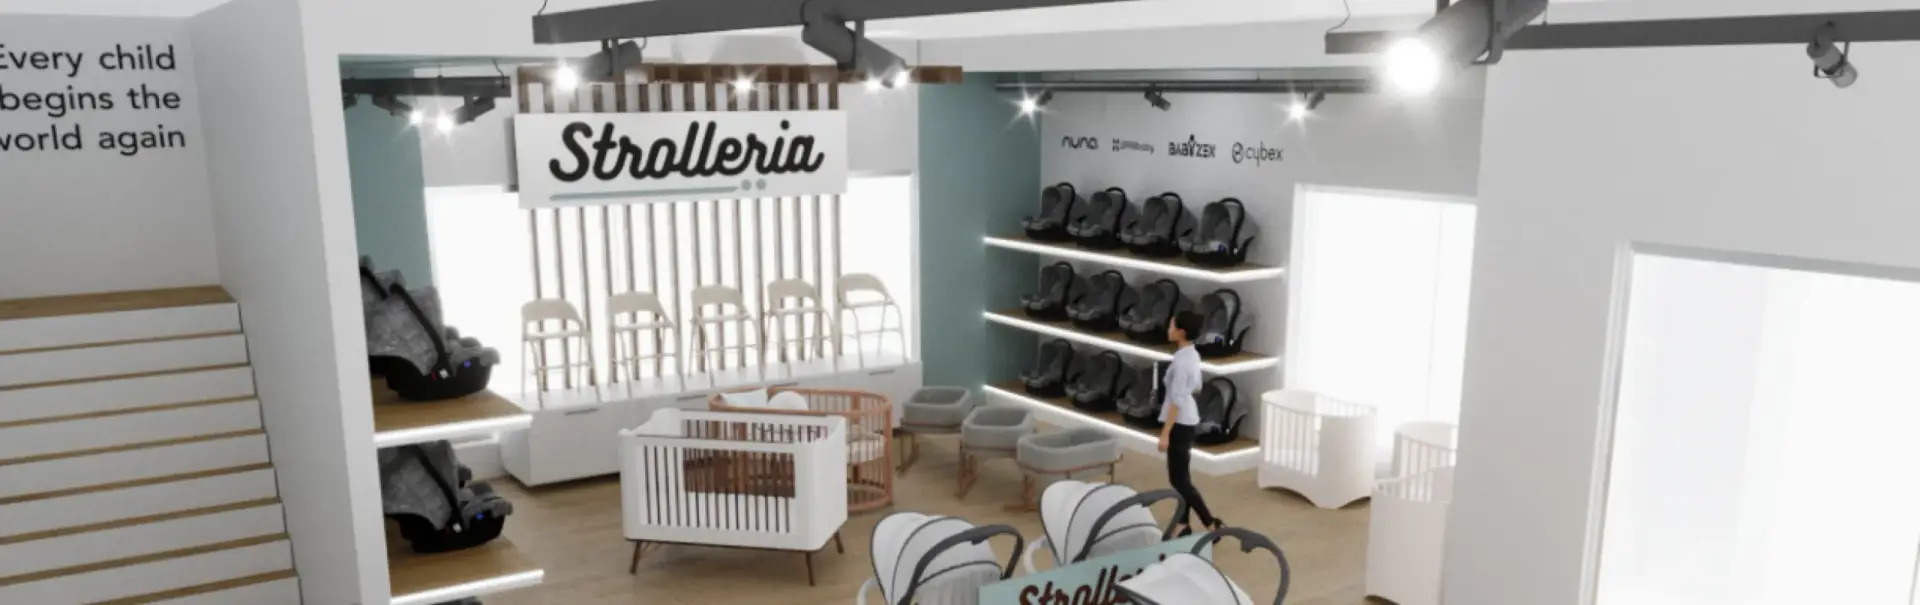 Detailed view of Strolleria's product vignette display showcasing strollers and baby products.